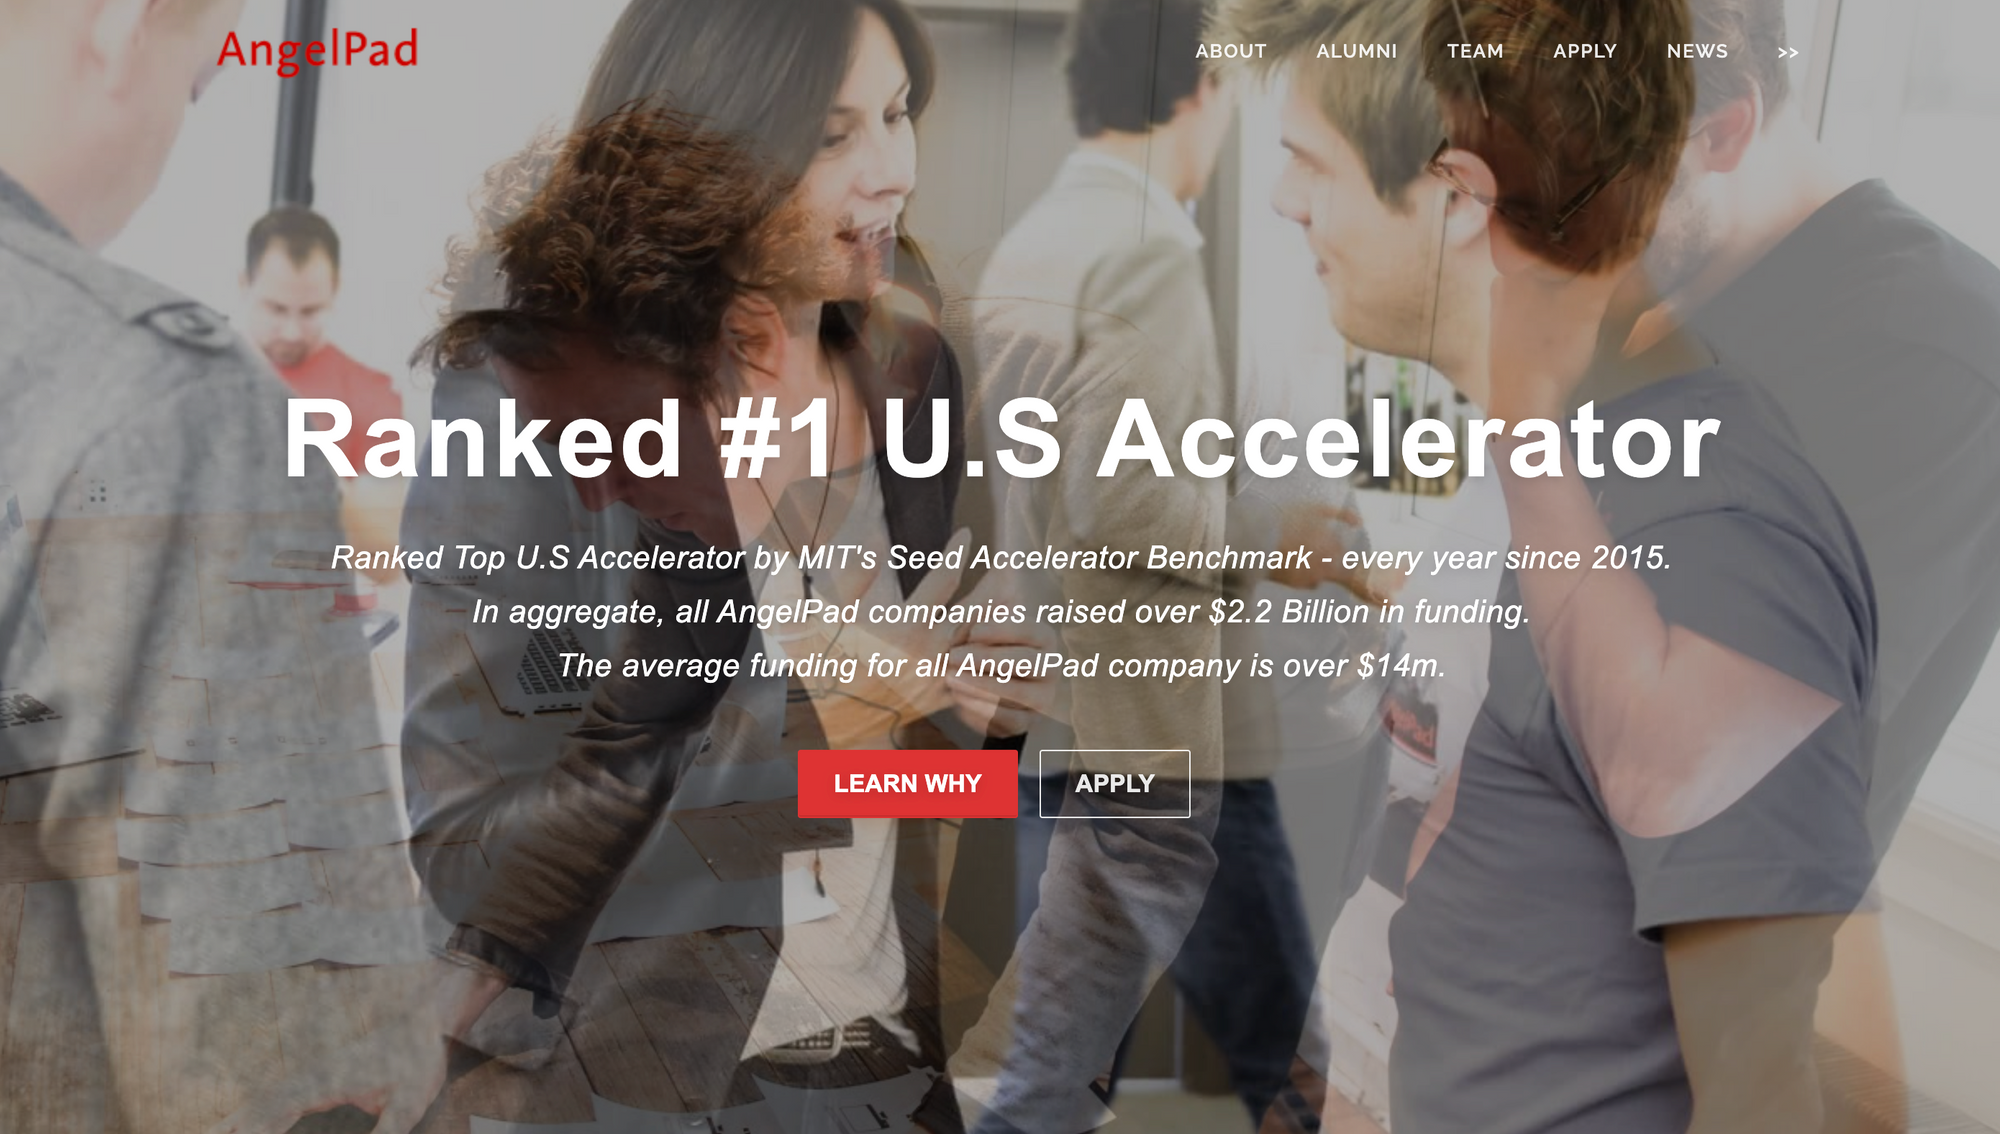 The 5 Top Startup Accelerators and Incubators to Jumpstart Your Business: AngelPad